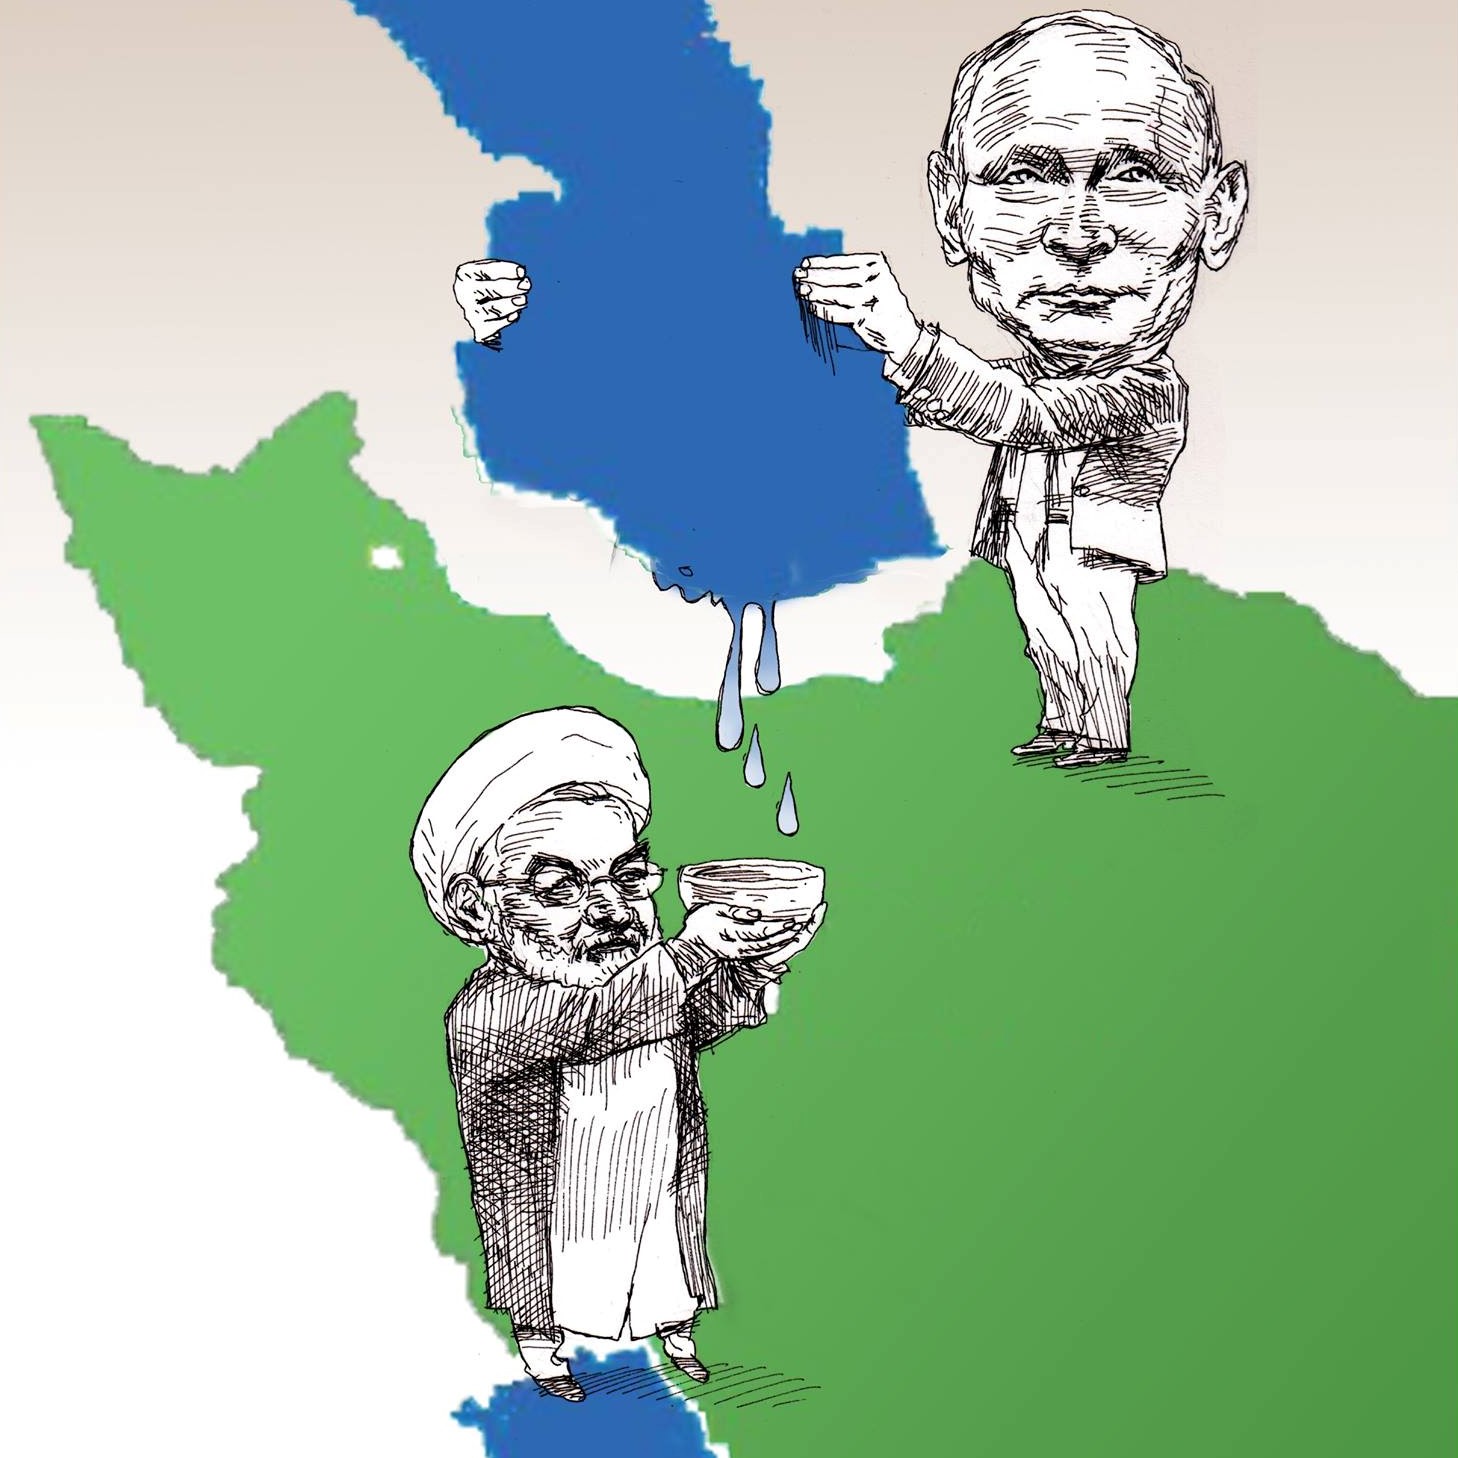 Cartoon: On Russia swindling Iran's rights to the resources of the Caspian Sea